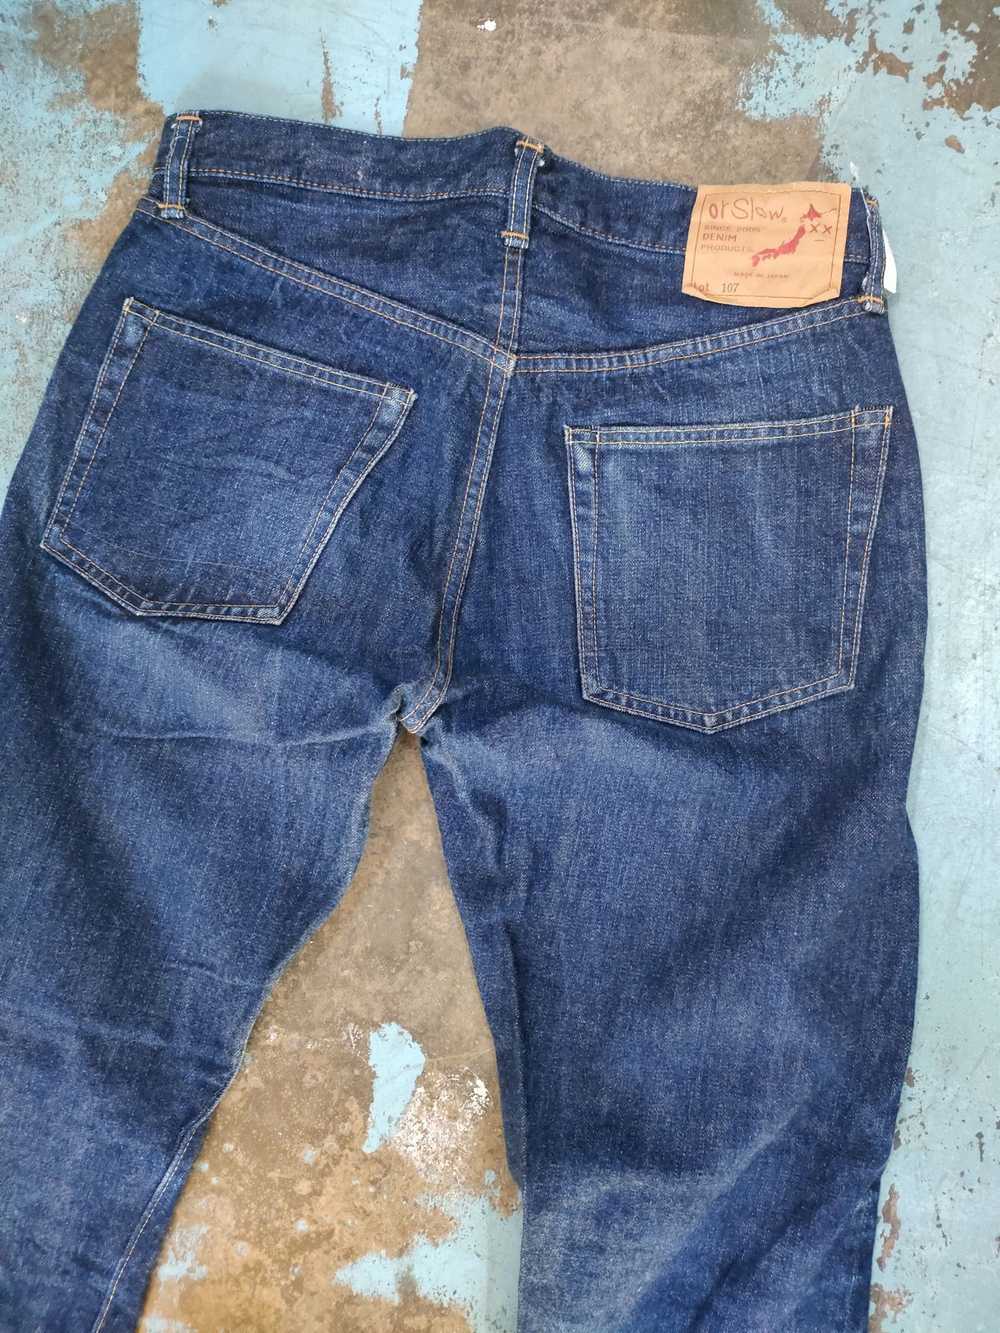 Japanese Brand Or Slow Japan Selvedge Jeans - image 10